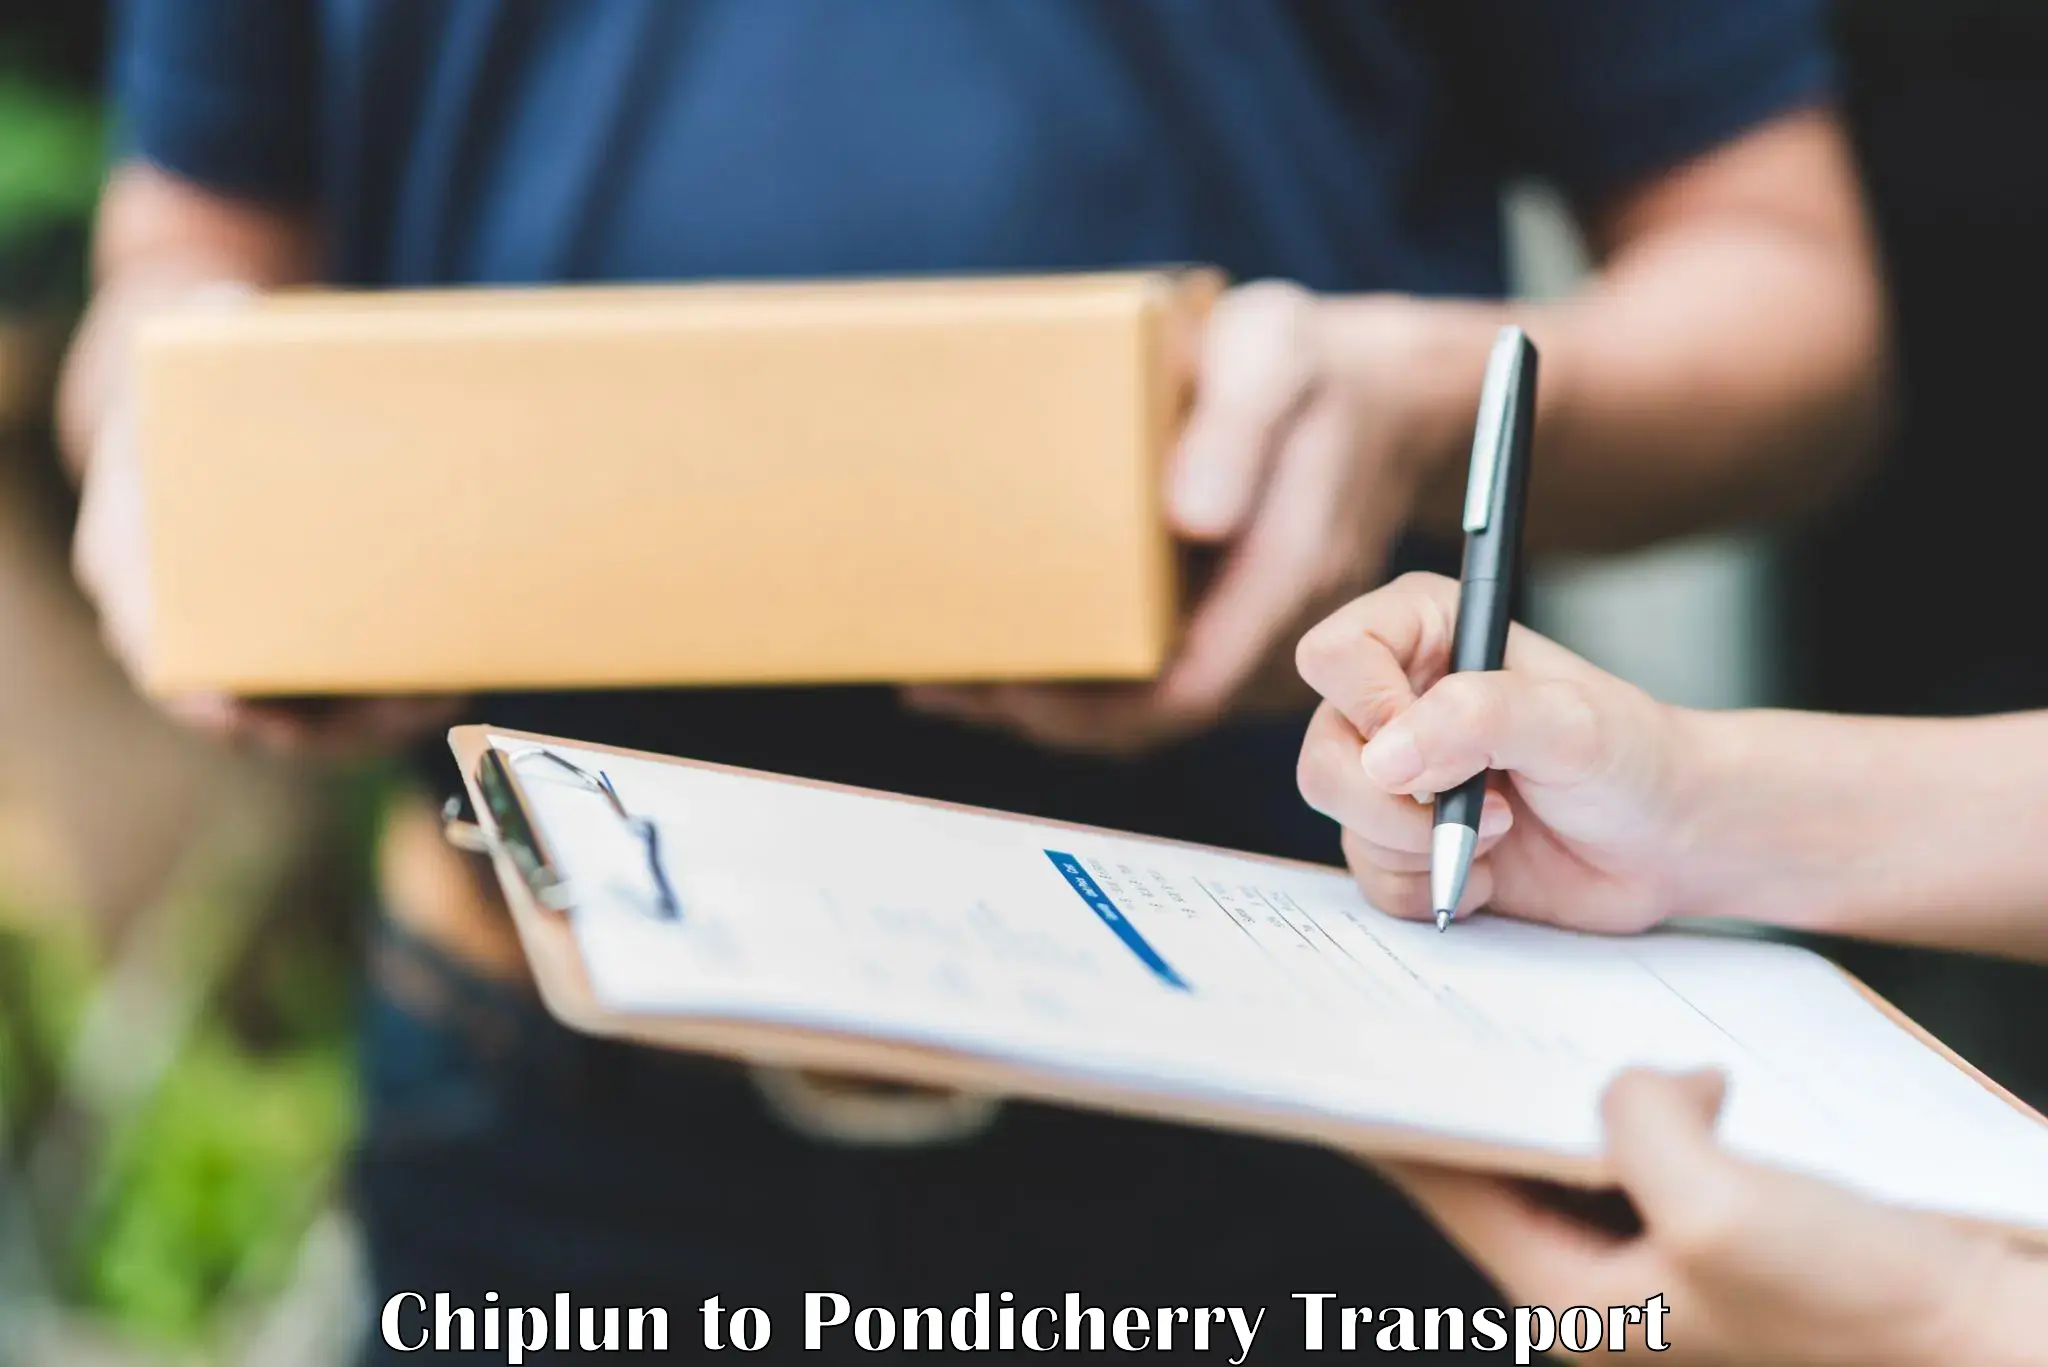 Delivery service Chiplun to Pondicherry